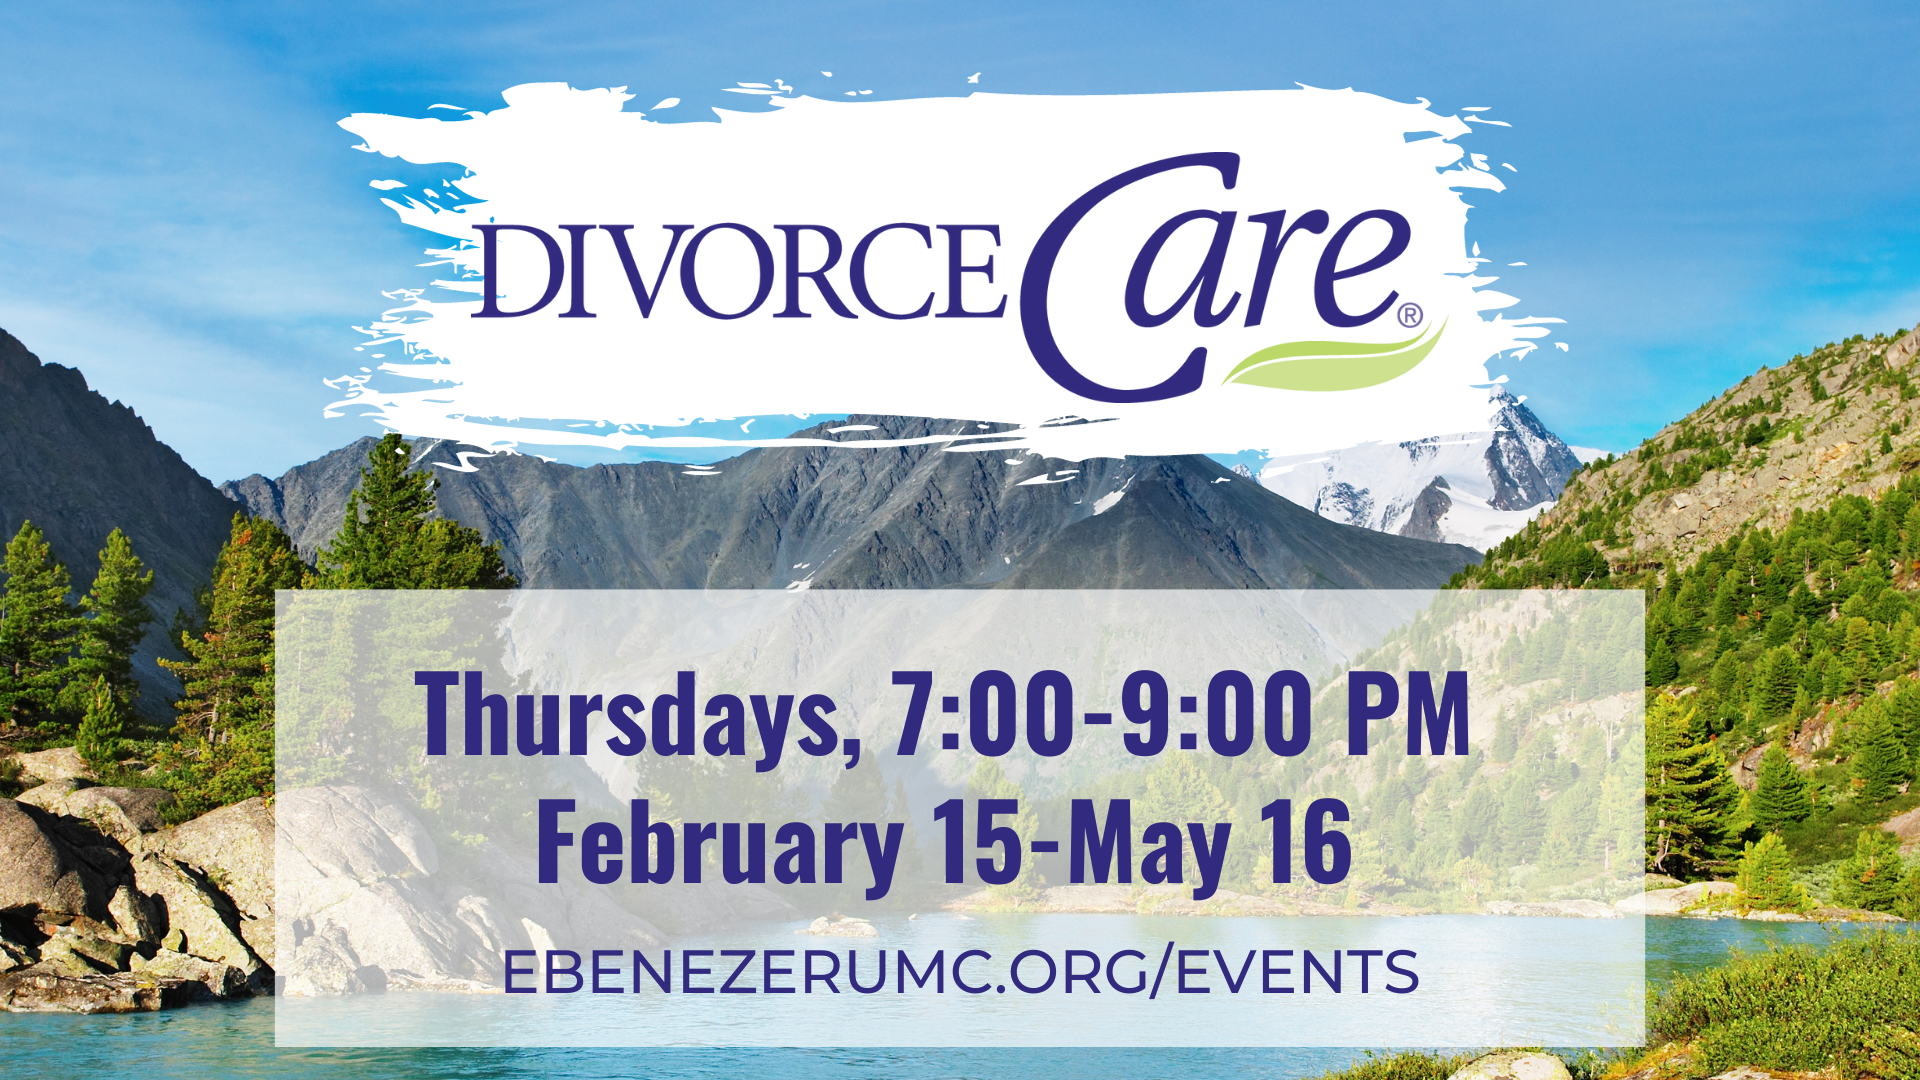 <h1 class="tribe-events-single-event-title">DivorceCare</h1>